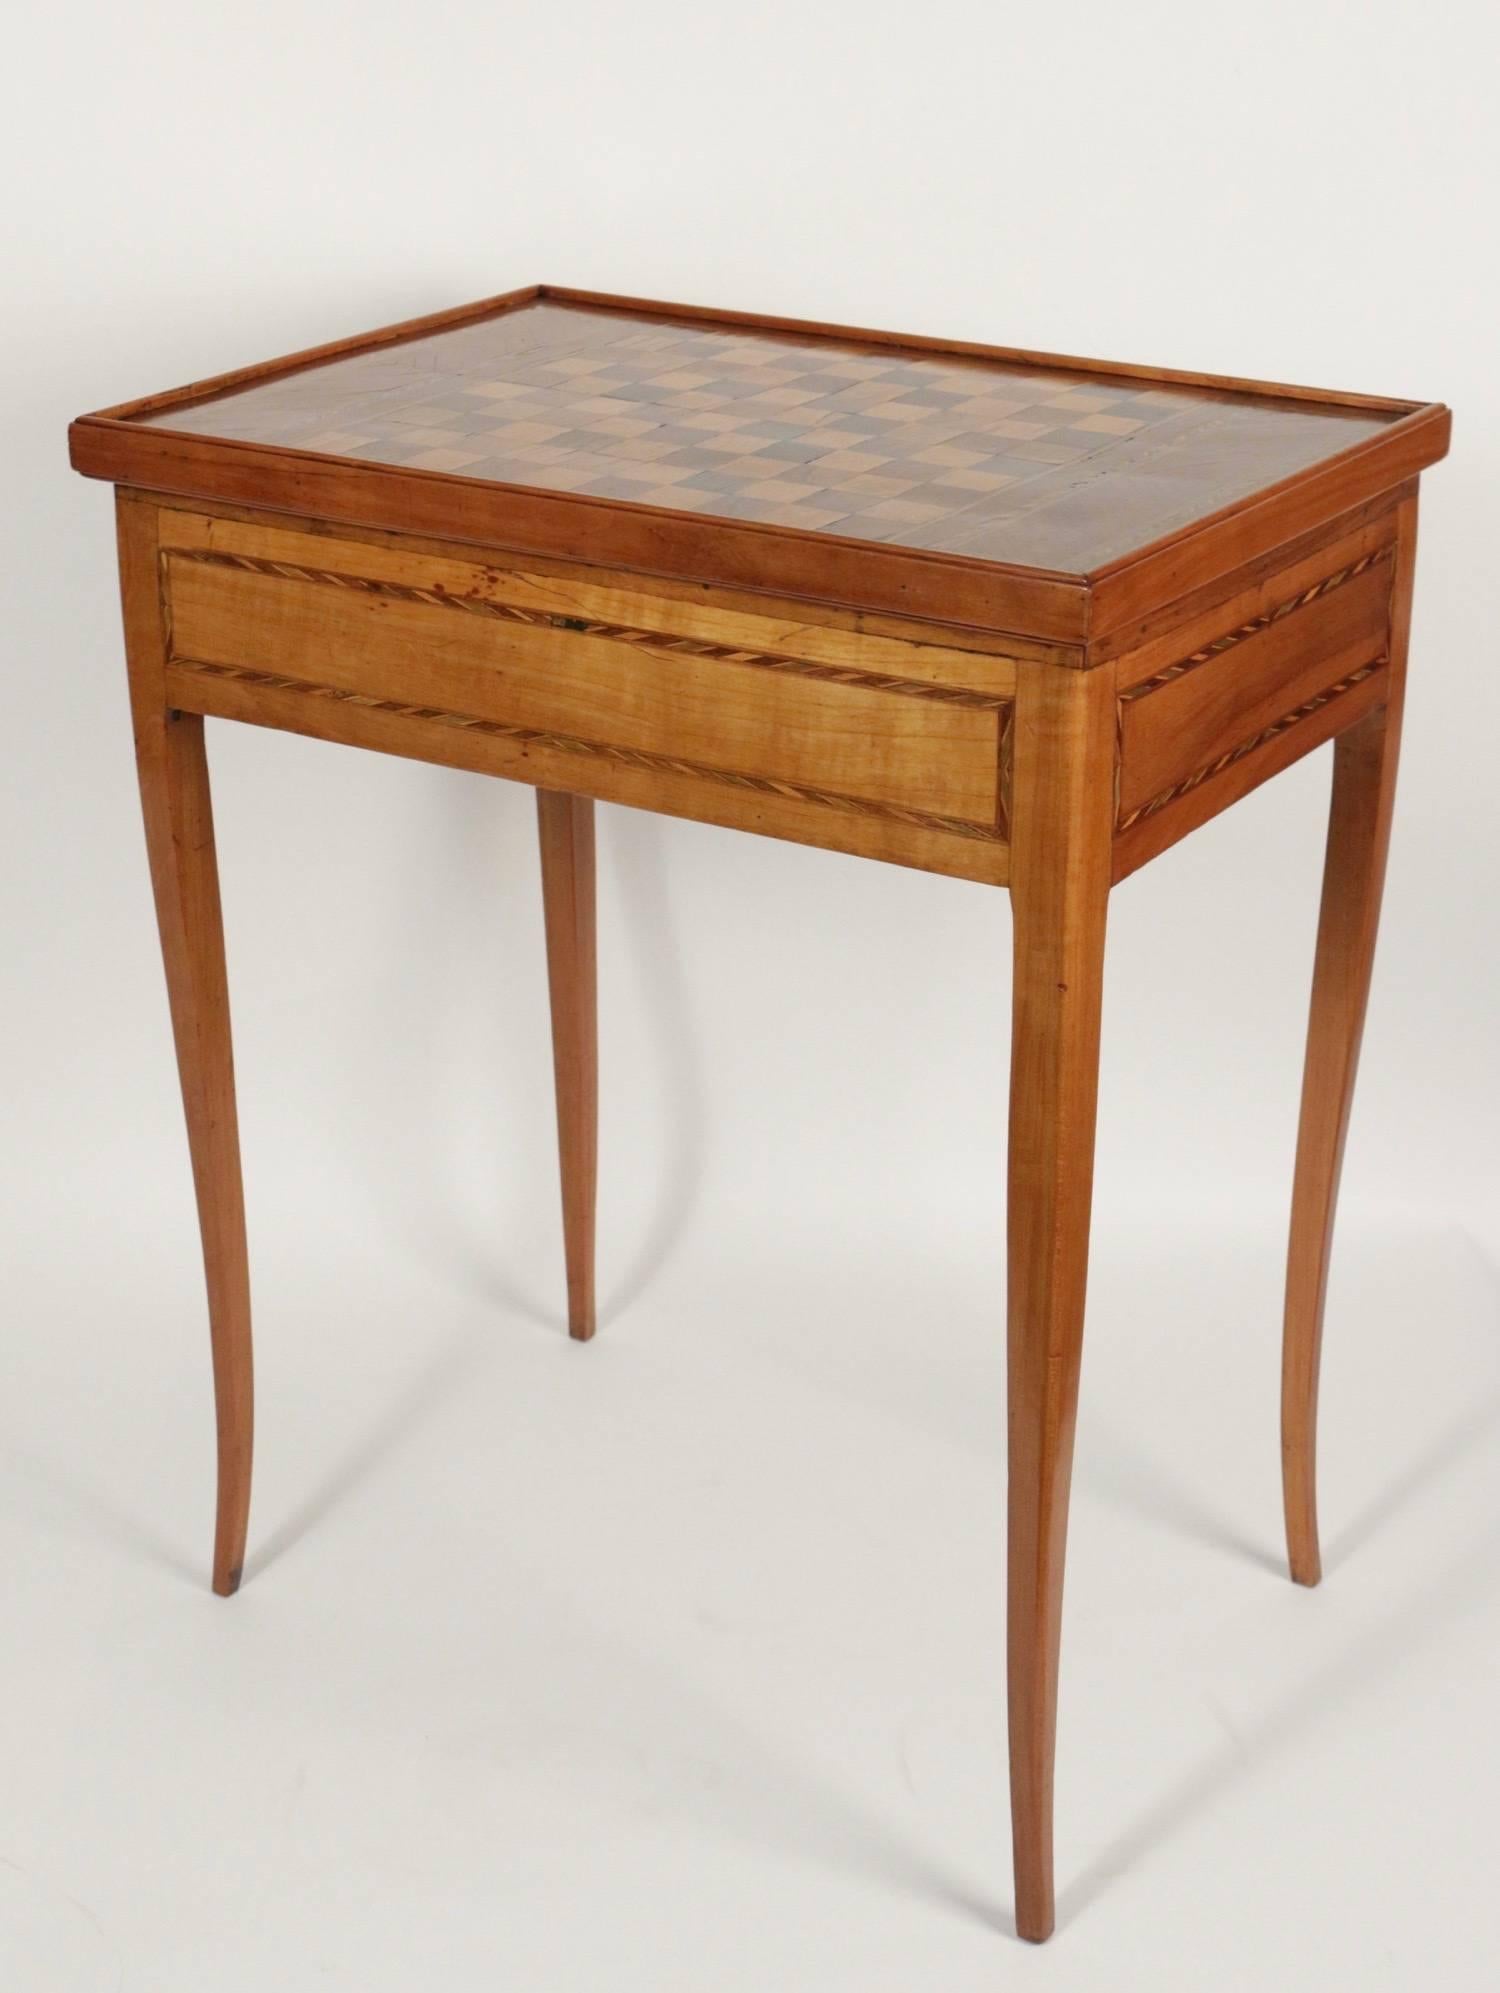 An handsome and rare French reversible small desk and game table, Transition Louis XV-Louis XVI period, circa 1765. This massive cherrywood table is typical of easy to place 18h century French furniture, very pratical because it is multi functional.